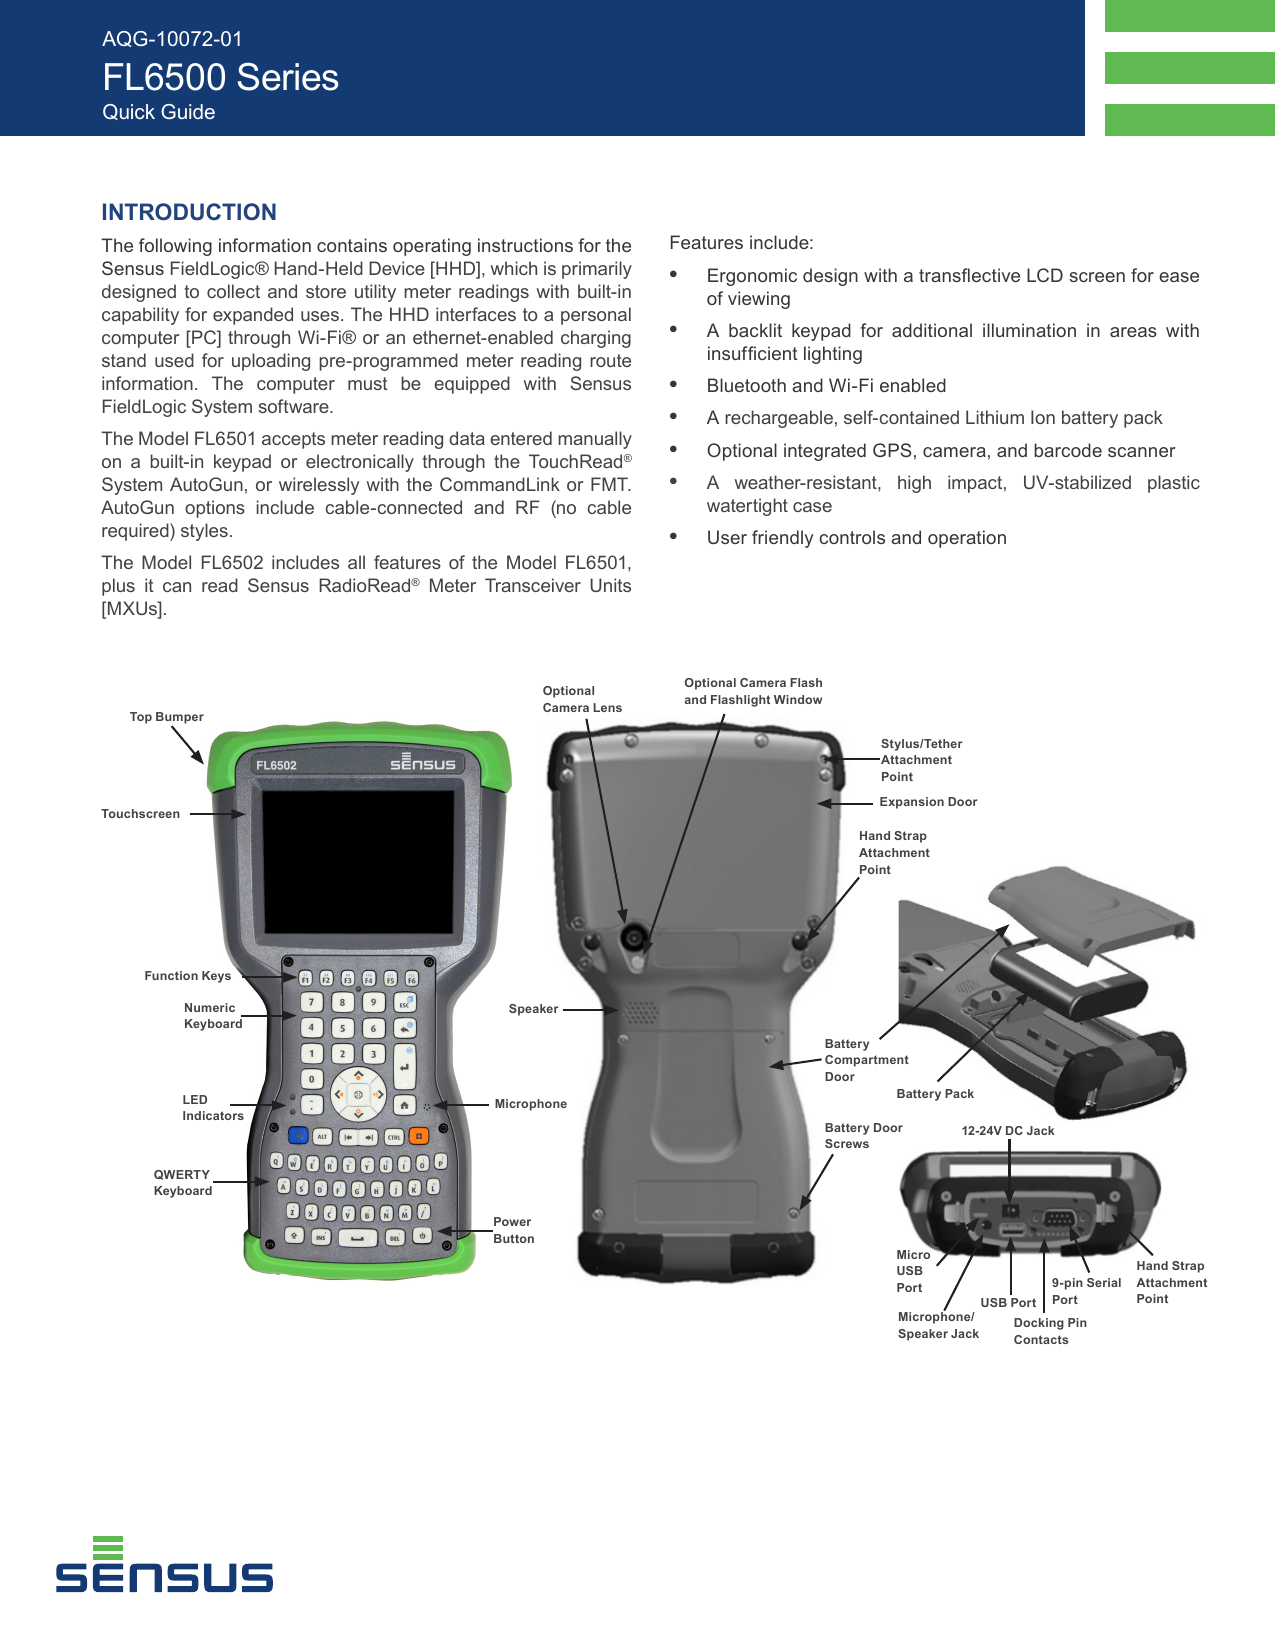 INTRODUCTIONThe following information contains operating instructions for the Sensus FieldLogic® Hand-Held Device [HHD], which is primarily designed to collect and store utility meter readings with built-in capability for expanded uses. The HHD interfaces to a personal computer [PC] through Wi-Fi® or an ethernet-enabled charging stand used for uploading pre-programmed meter reading route information. The computer must be equipped with Sensus FieldLogic System software.The Model FL6501 accepts meter reading data entered manually on a built-in keypad or electronically through the TouchRead® System AutoGun, or wirelessly with the CommandLink or FMT. AutoGun options include cable-connected and RF (no cable required) styles.The Model FL6502 includes all features of the Model FL6501, plus it can read Sensus RadioRead® Meter Transceiver Units [MXUs].Features include:•  Ergonomic design with a transective LCD screen for ease of viewing•  A backlit keypad for additional illumination in areas with insufcient lighting•  Bluetooth and Wi-Fi enabled•  A rechargeable, self-contained Lithium Ion battery pack•  Optional integrated GPS, camera, and barcode scanner•  A weather-resistant, high impact, UV-stabilized plastic watertight case •  User friendly controls and operationAQG-10072-01 FL6500 SeriesQuick GuideTouchscreenPower ButtonTop BumperQWERTY KeyboardMicrophoneStylus/Tether Attachment PointFunction KeysNumeric KeyboardExpansion DoorLED IndicatorsOptional Camera LensOptional Camera Flash and Flashlight WindowSpeakerBattery Compartment DoorBattery Door Screws Hand Strap Attachment PointBattery PackHand Strap Attachment PointMicro USB PortMicrophone/Speaker JackUSB PortDocking Pin Contacts12-24V DC Jack9-pin Serial Port